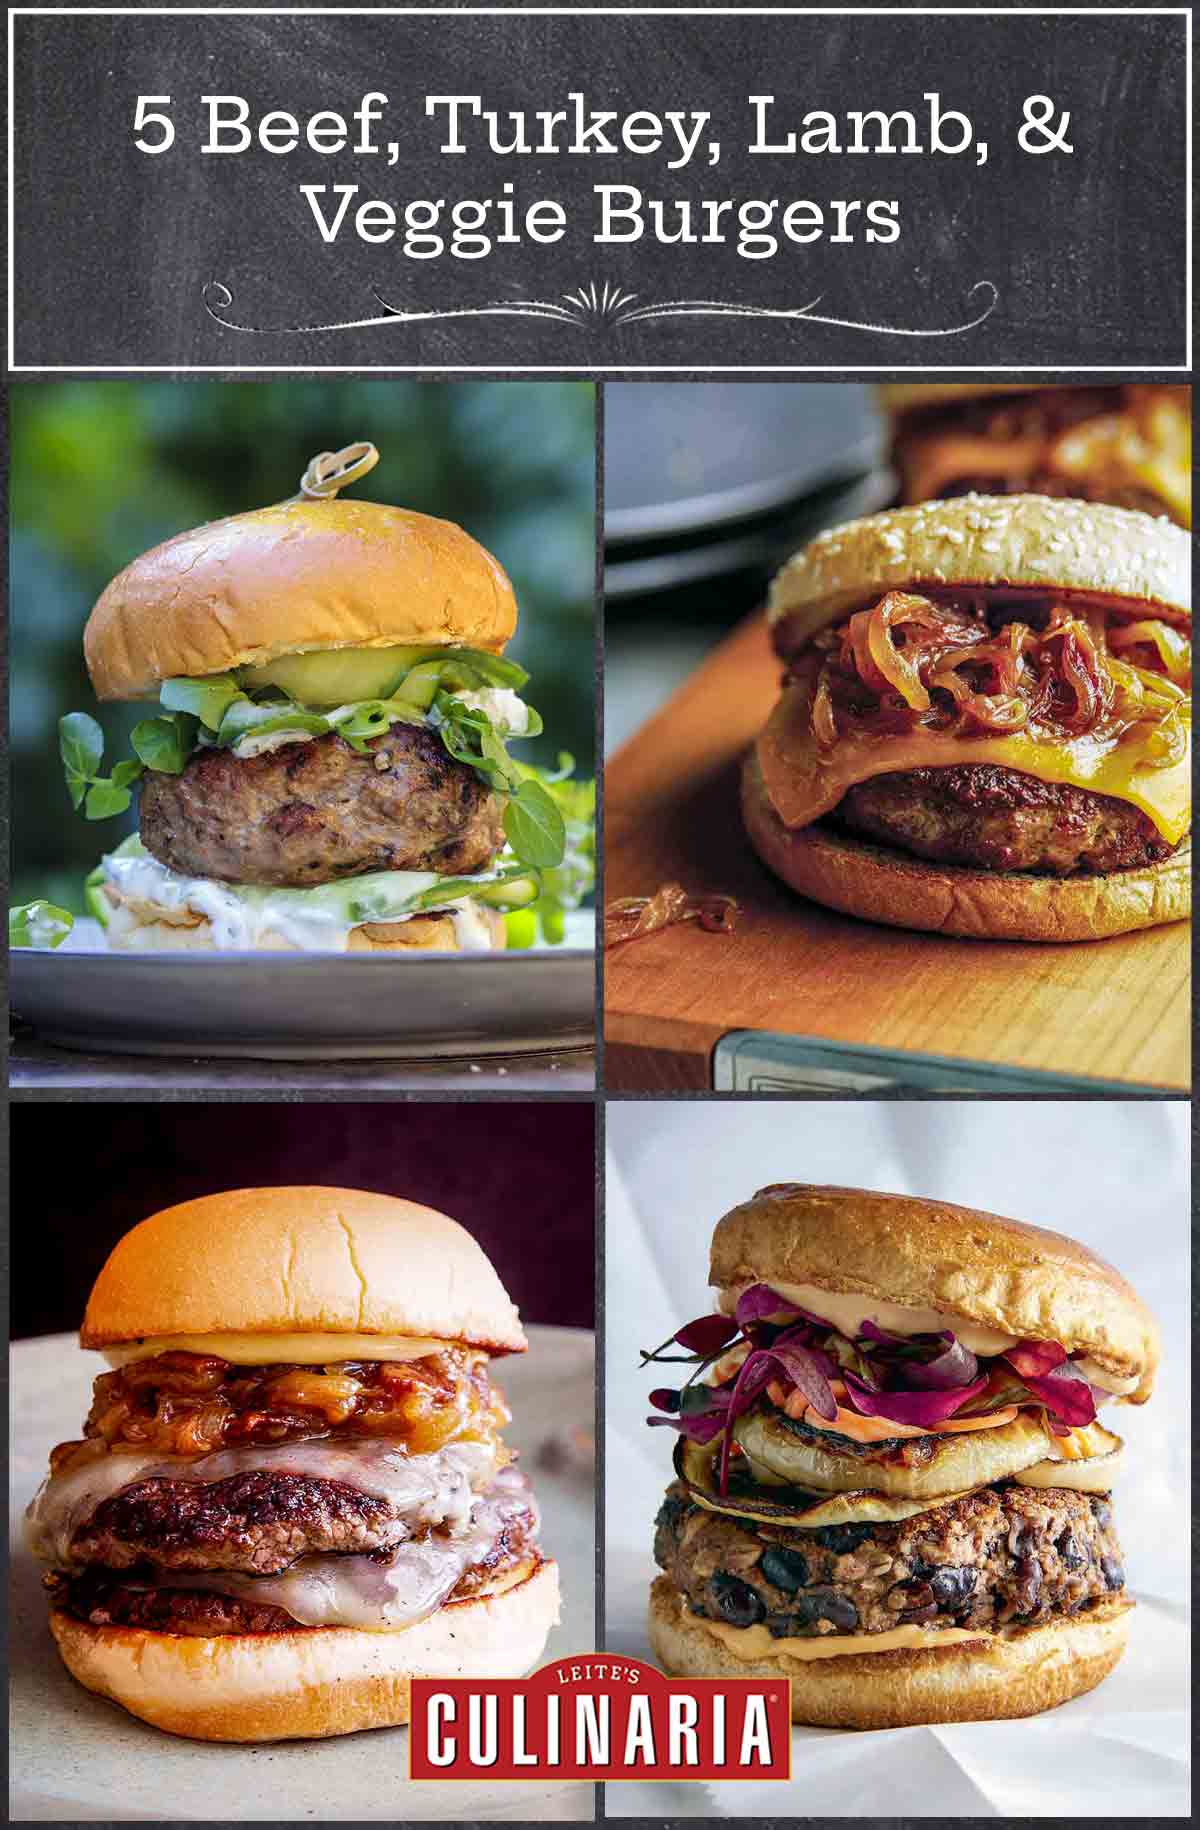 Images of 4 amazing burgers -- a lamb burger with tzatziki, turkey burger with caramelized onions, a double cheeseburger, and a black bean burger.